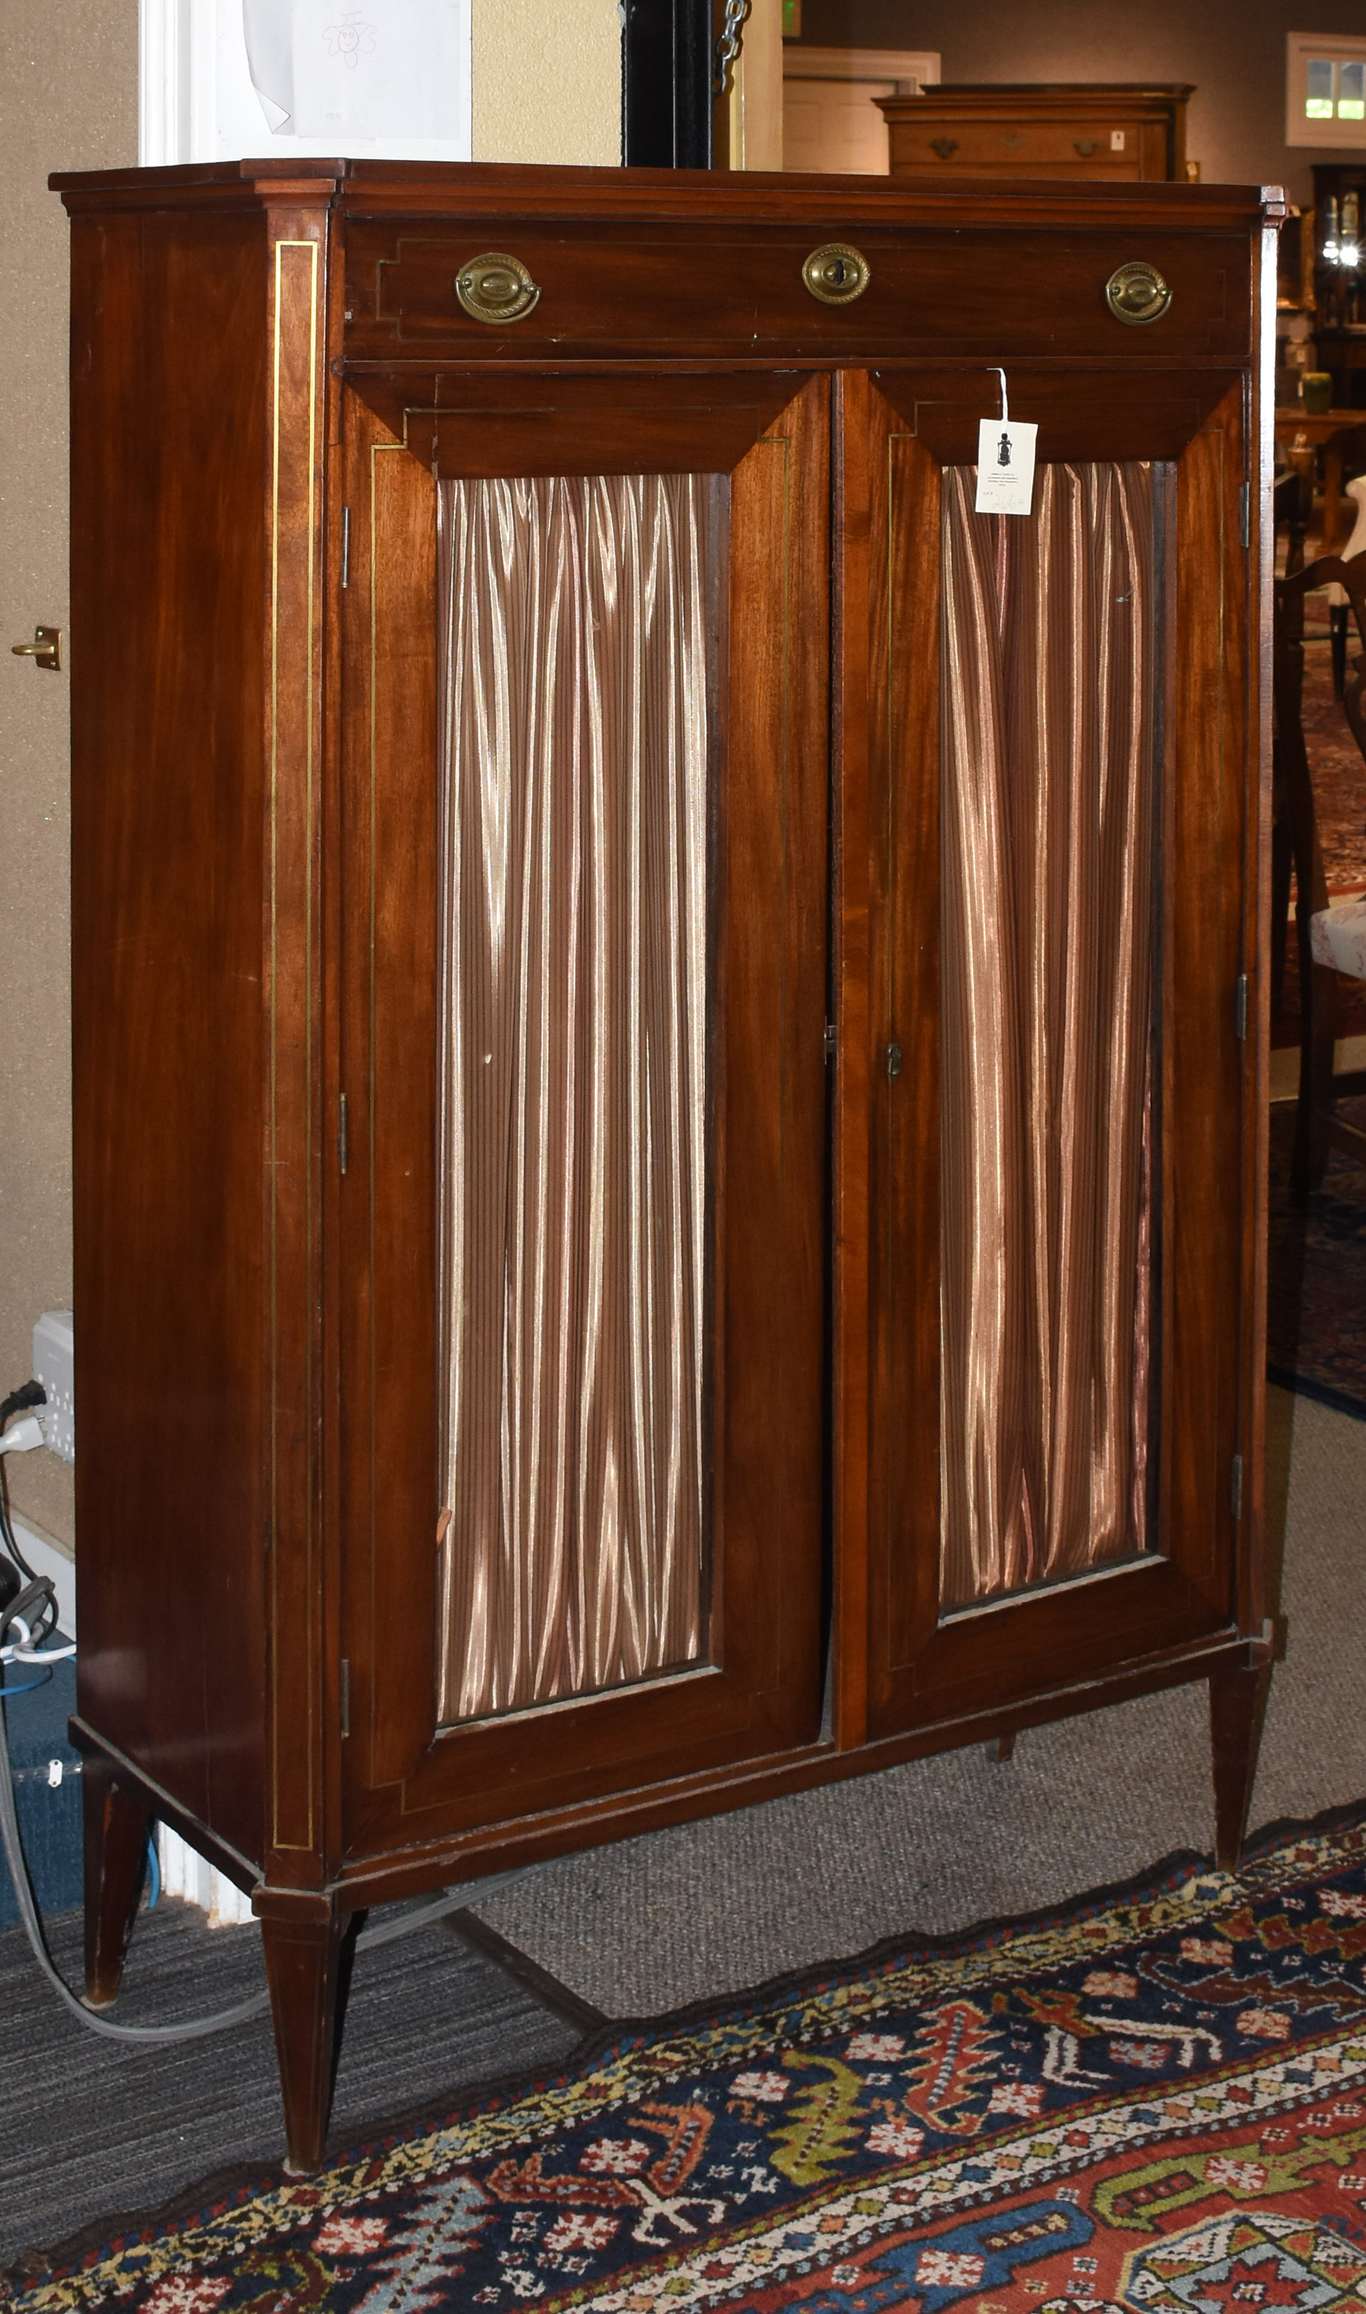 French 19th C. brass inlaid mahogany cabinet, with one drawer above two glass doors, 59”H. x 39”W. x 16”D.